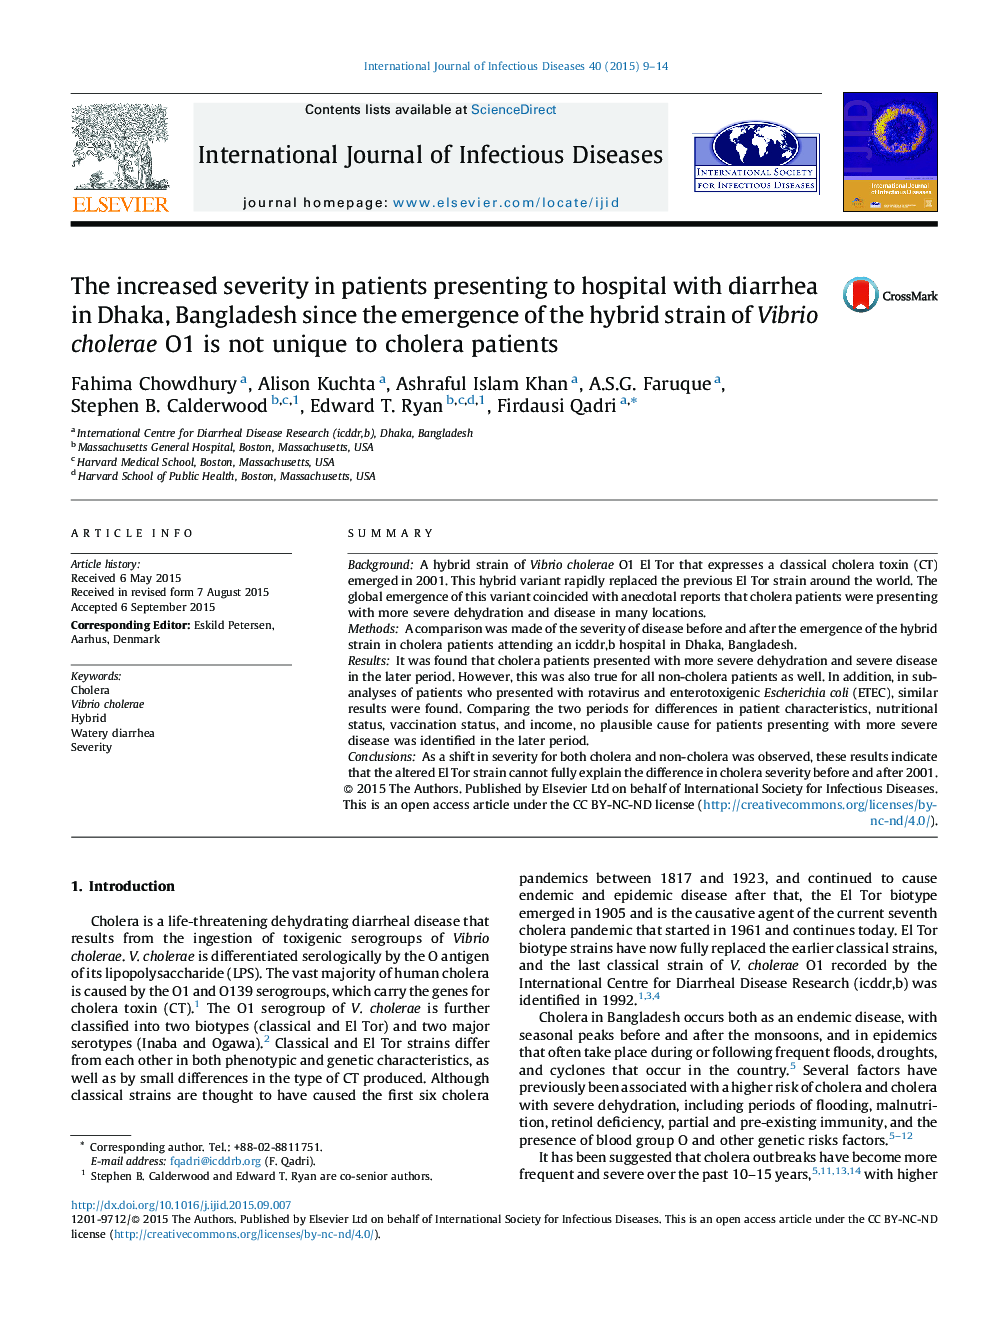 The increased severity in patients presenting to hospital with diarrhea in Dhaka, Bangladesh since the emergence of the hybrid strain of Vibrio cholerae O1 is not unique to cholera patients